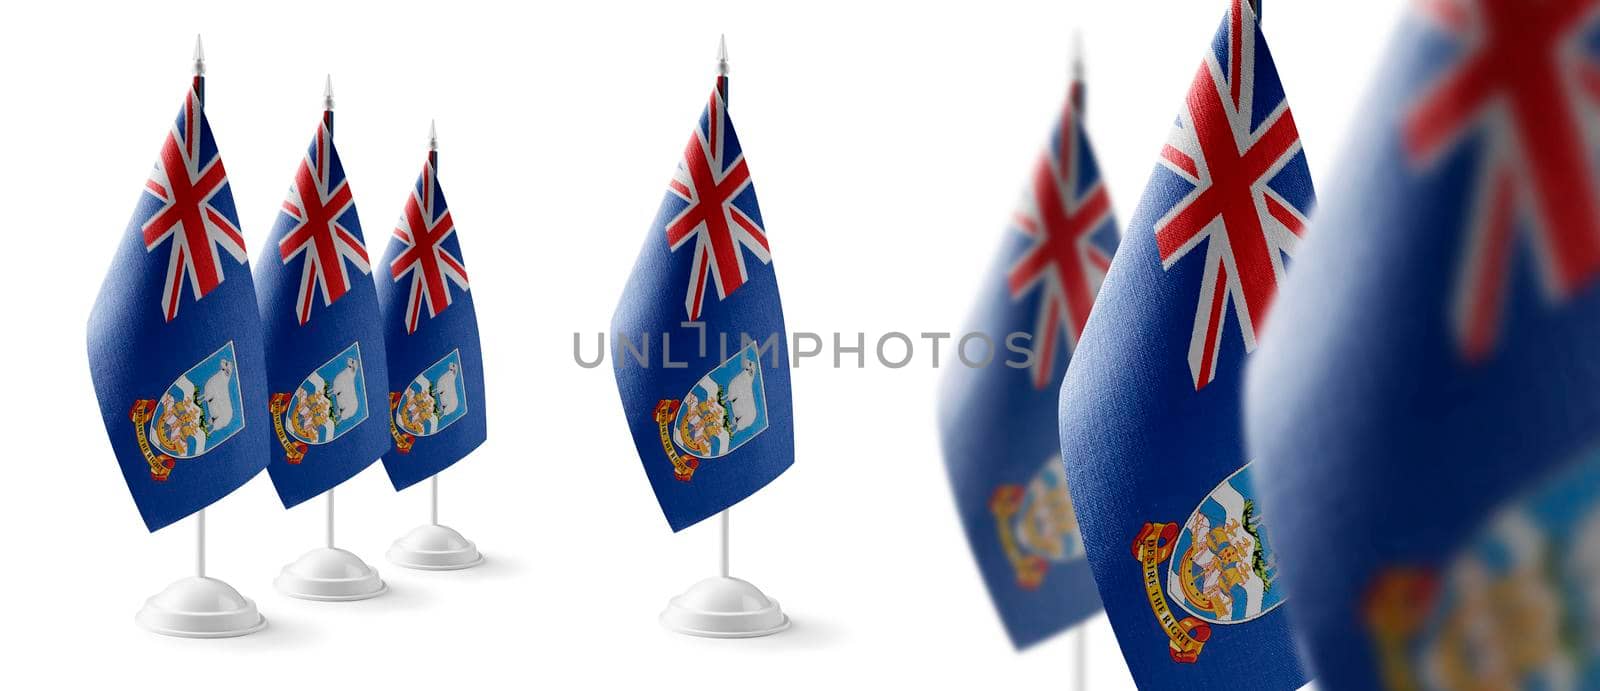 Set of Falkland Islands national flags on a white background.